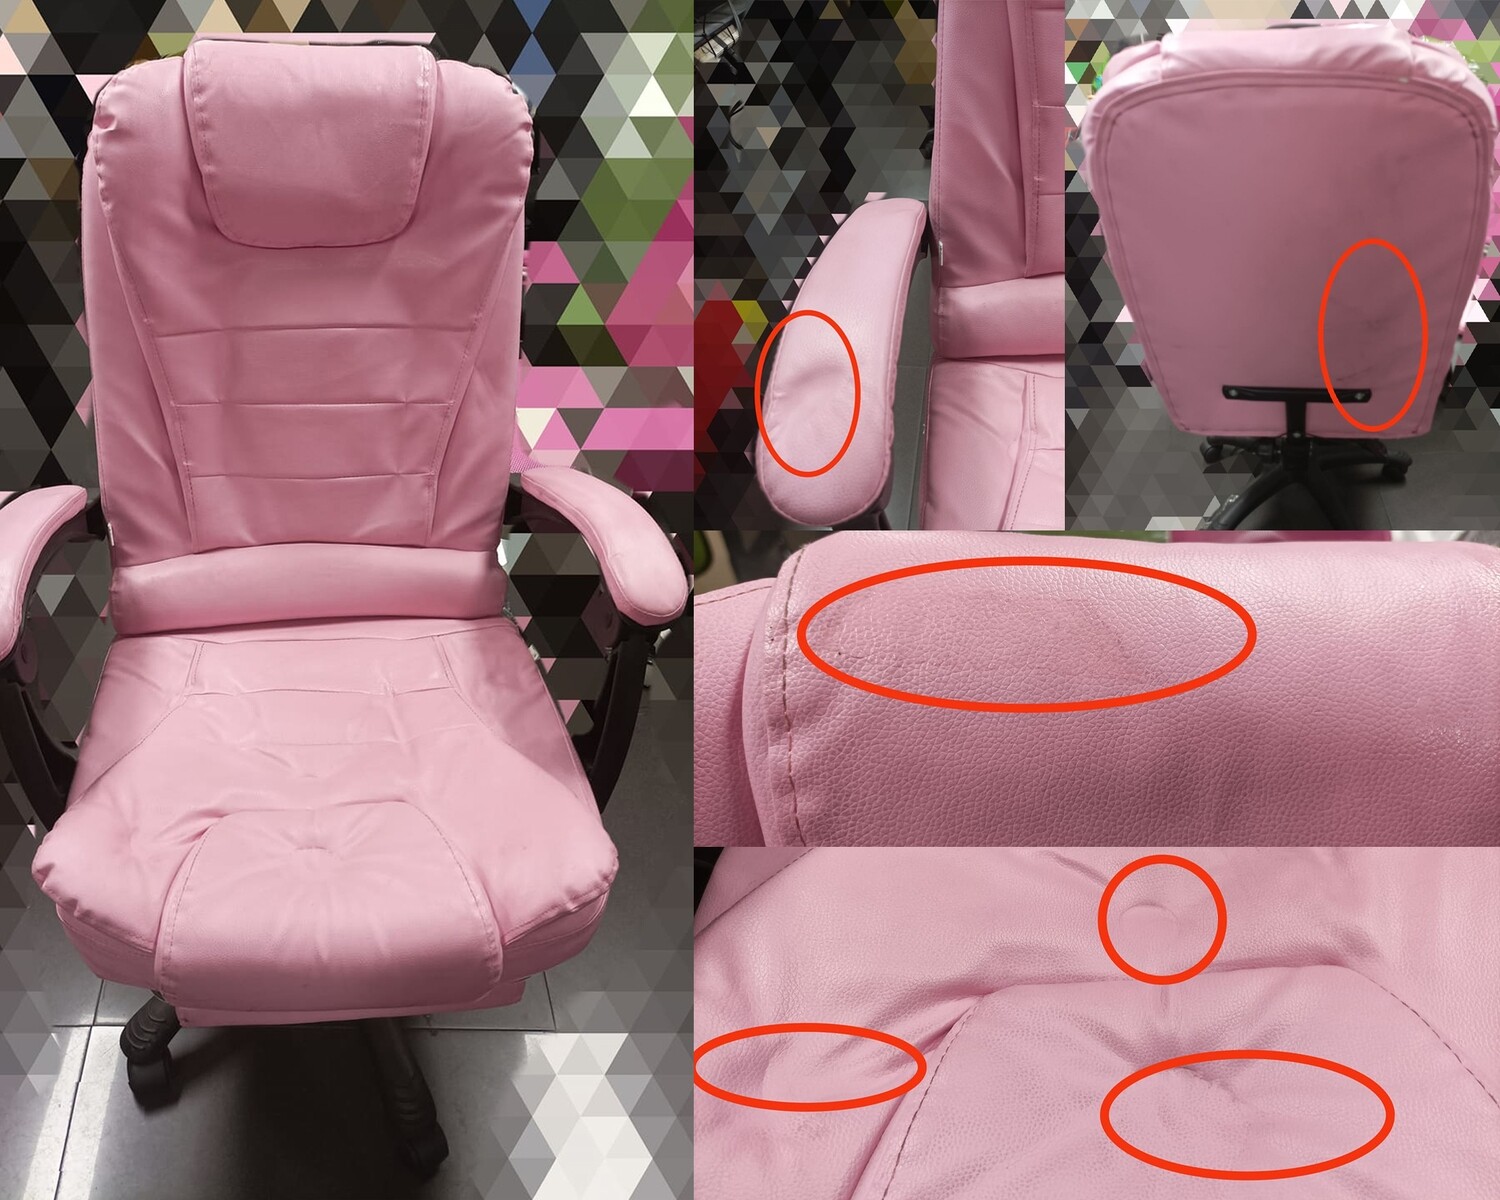 (Sale) OFX G10 High Back PU Chair With Foot Rest (Pink) (Slightly Dirty & Deform Armrest / Seat Cushion)